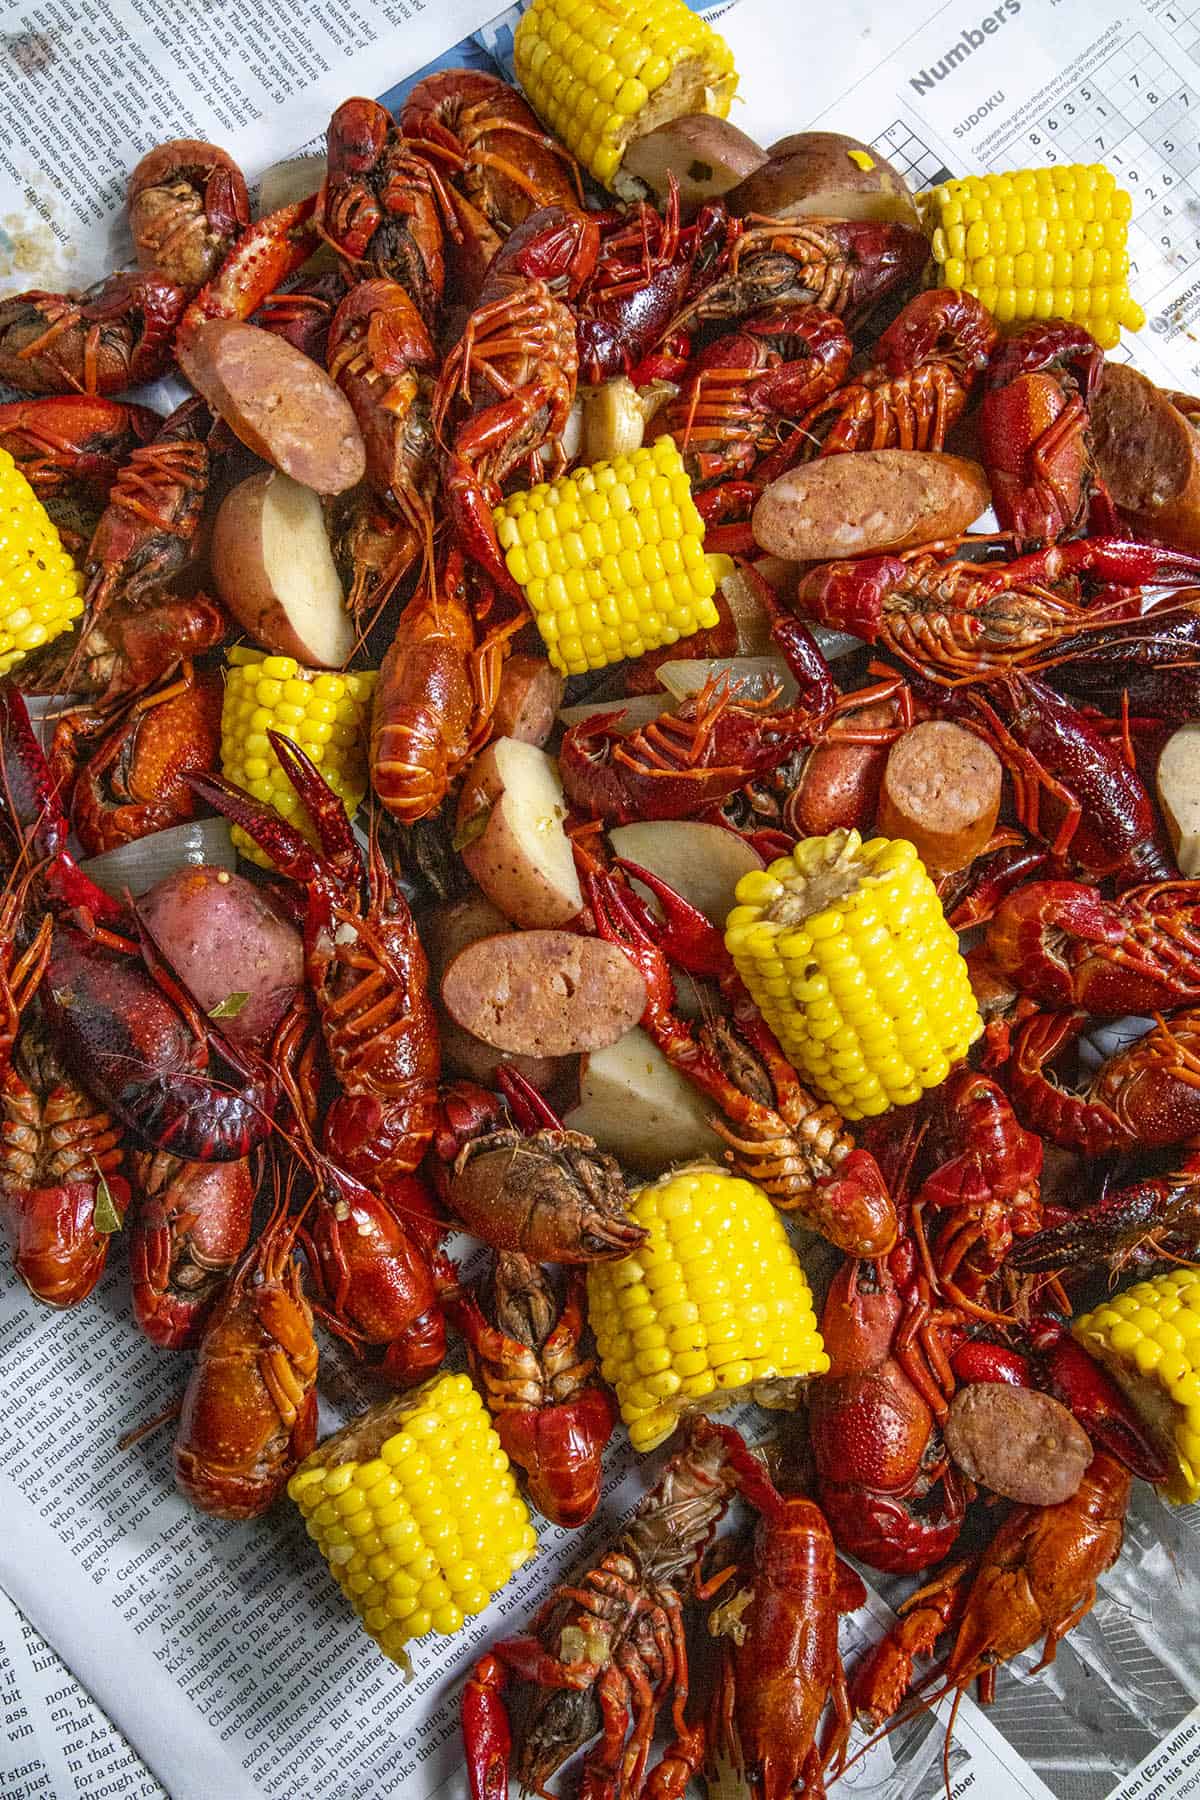 Lots of boiled crawfish, corn, potatoes, and andouille sausage piled over newspaper on a table